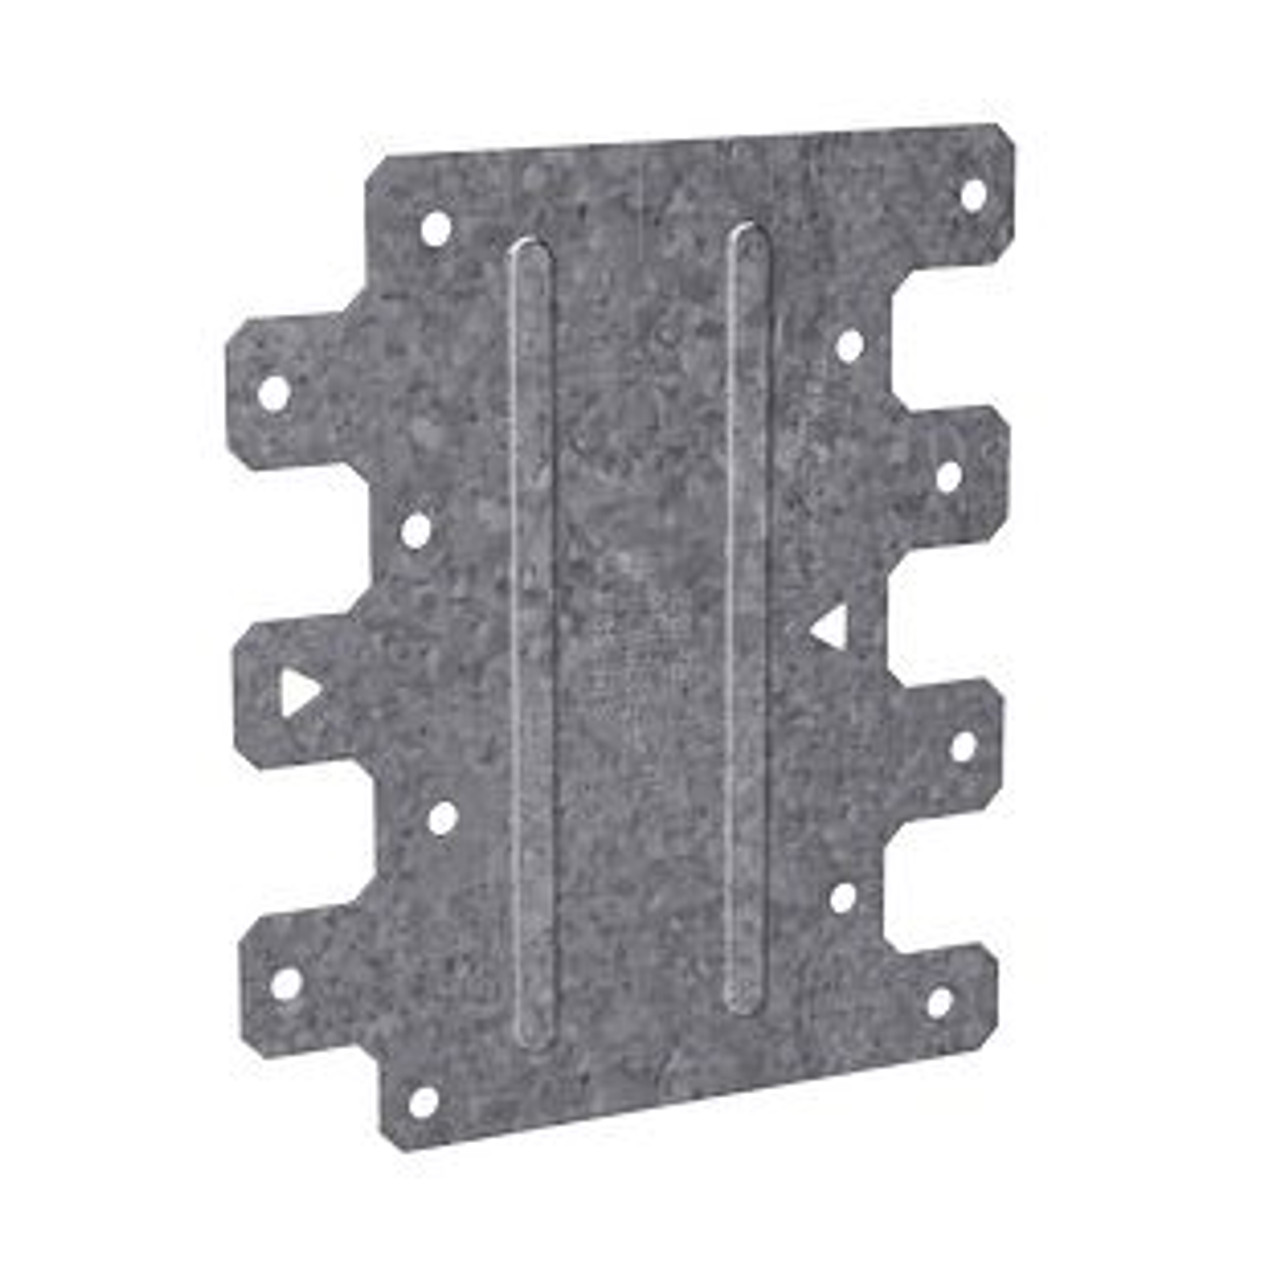 Simpson Strong-Tie LTP5 4-1/2 x 5-1/8-Inch Lateral Tie Plate 100 Pk